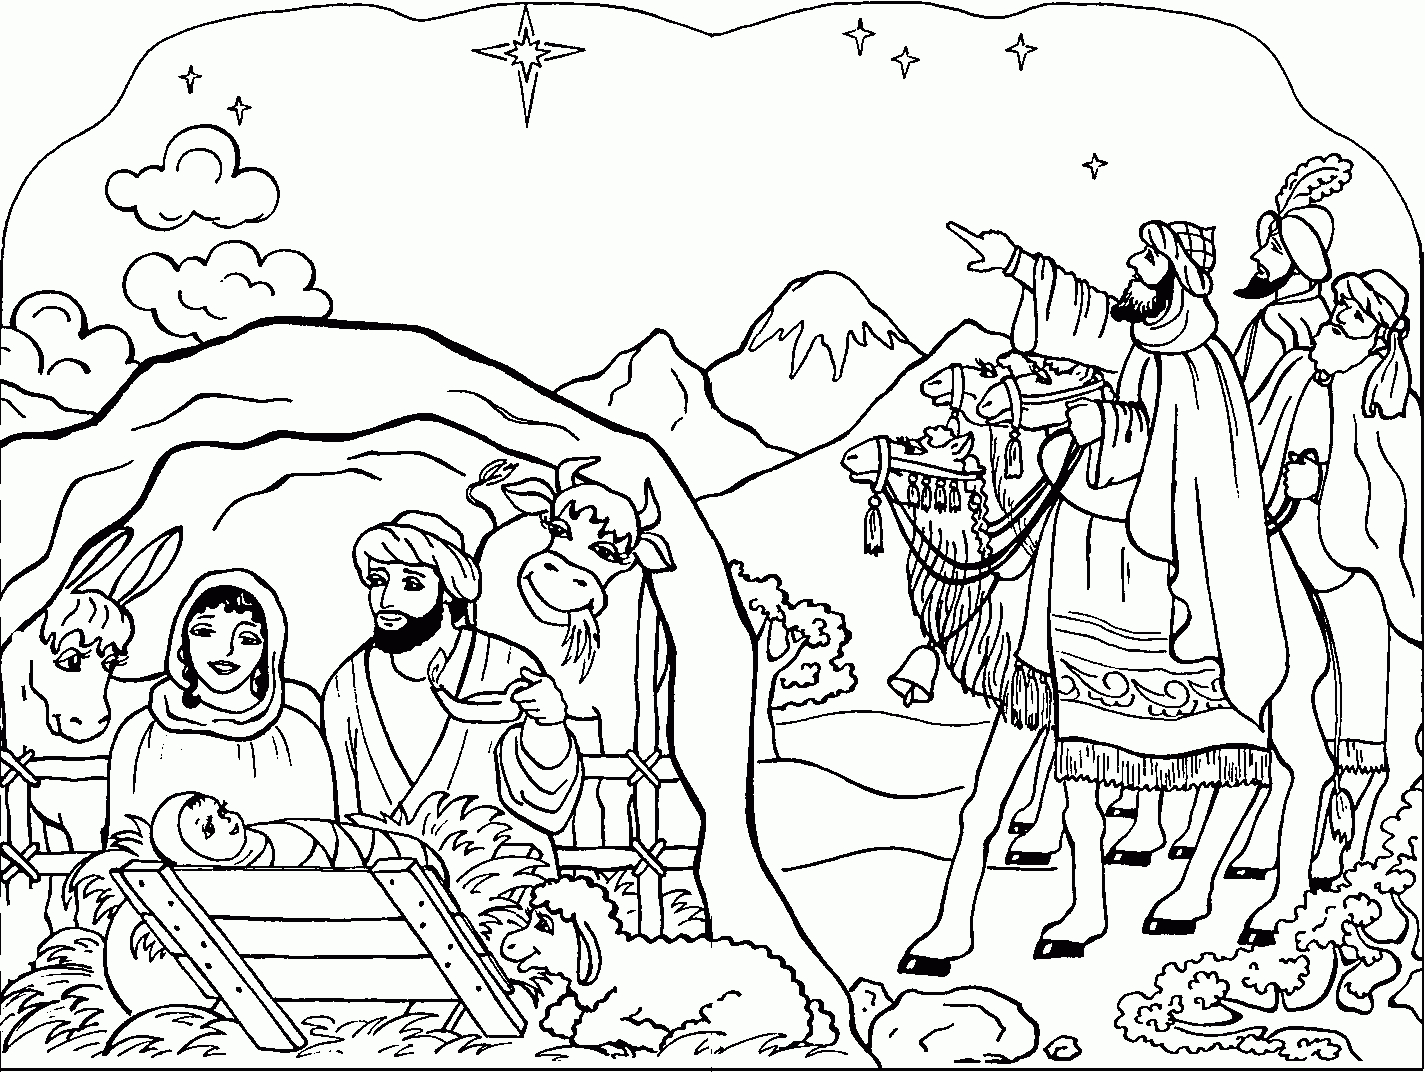 Printable Coloring Pages Of Nativity Scenes For Kids | Coloring - Free Printable Pictures Of Nativity Scenes